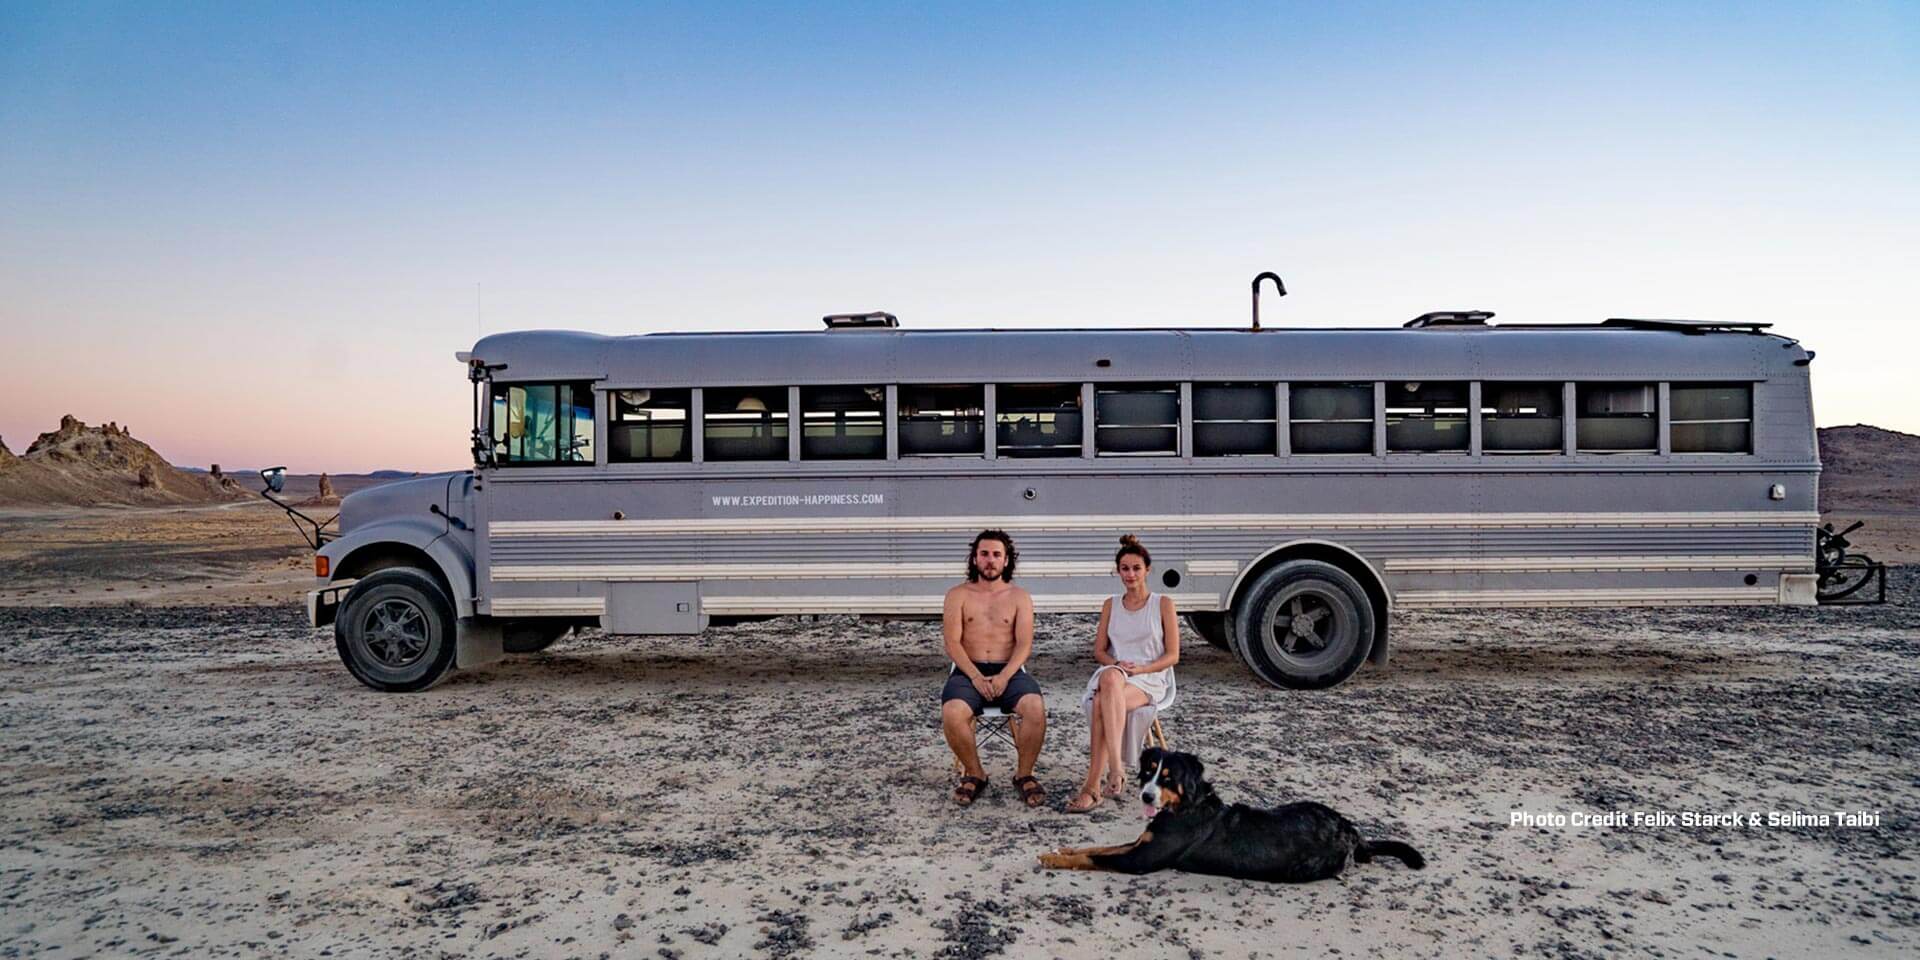 Two people with their dog sitting in front of a bus in the dessert